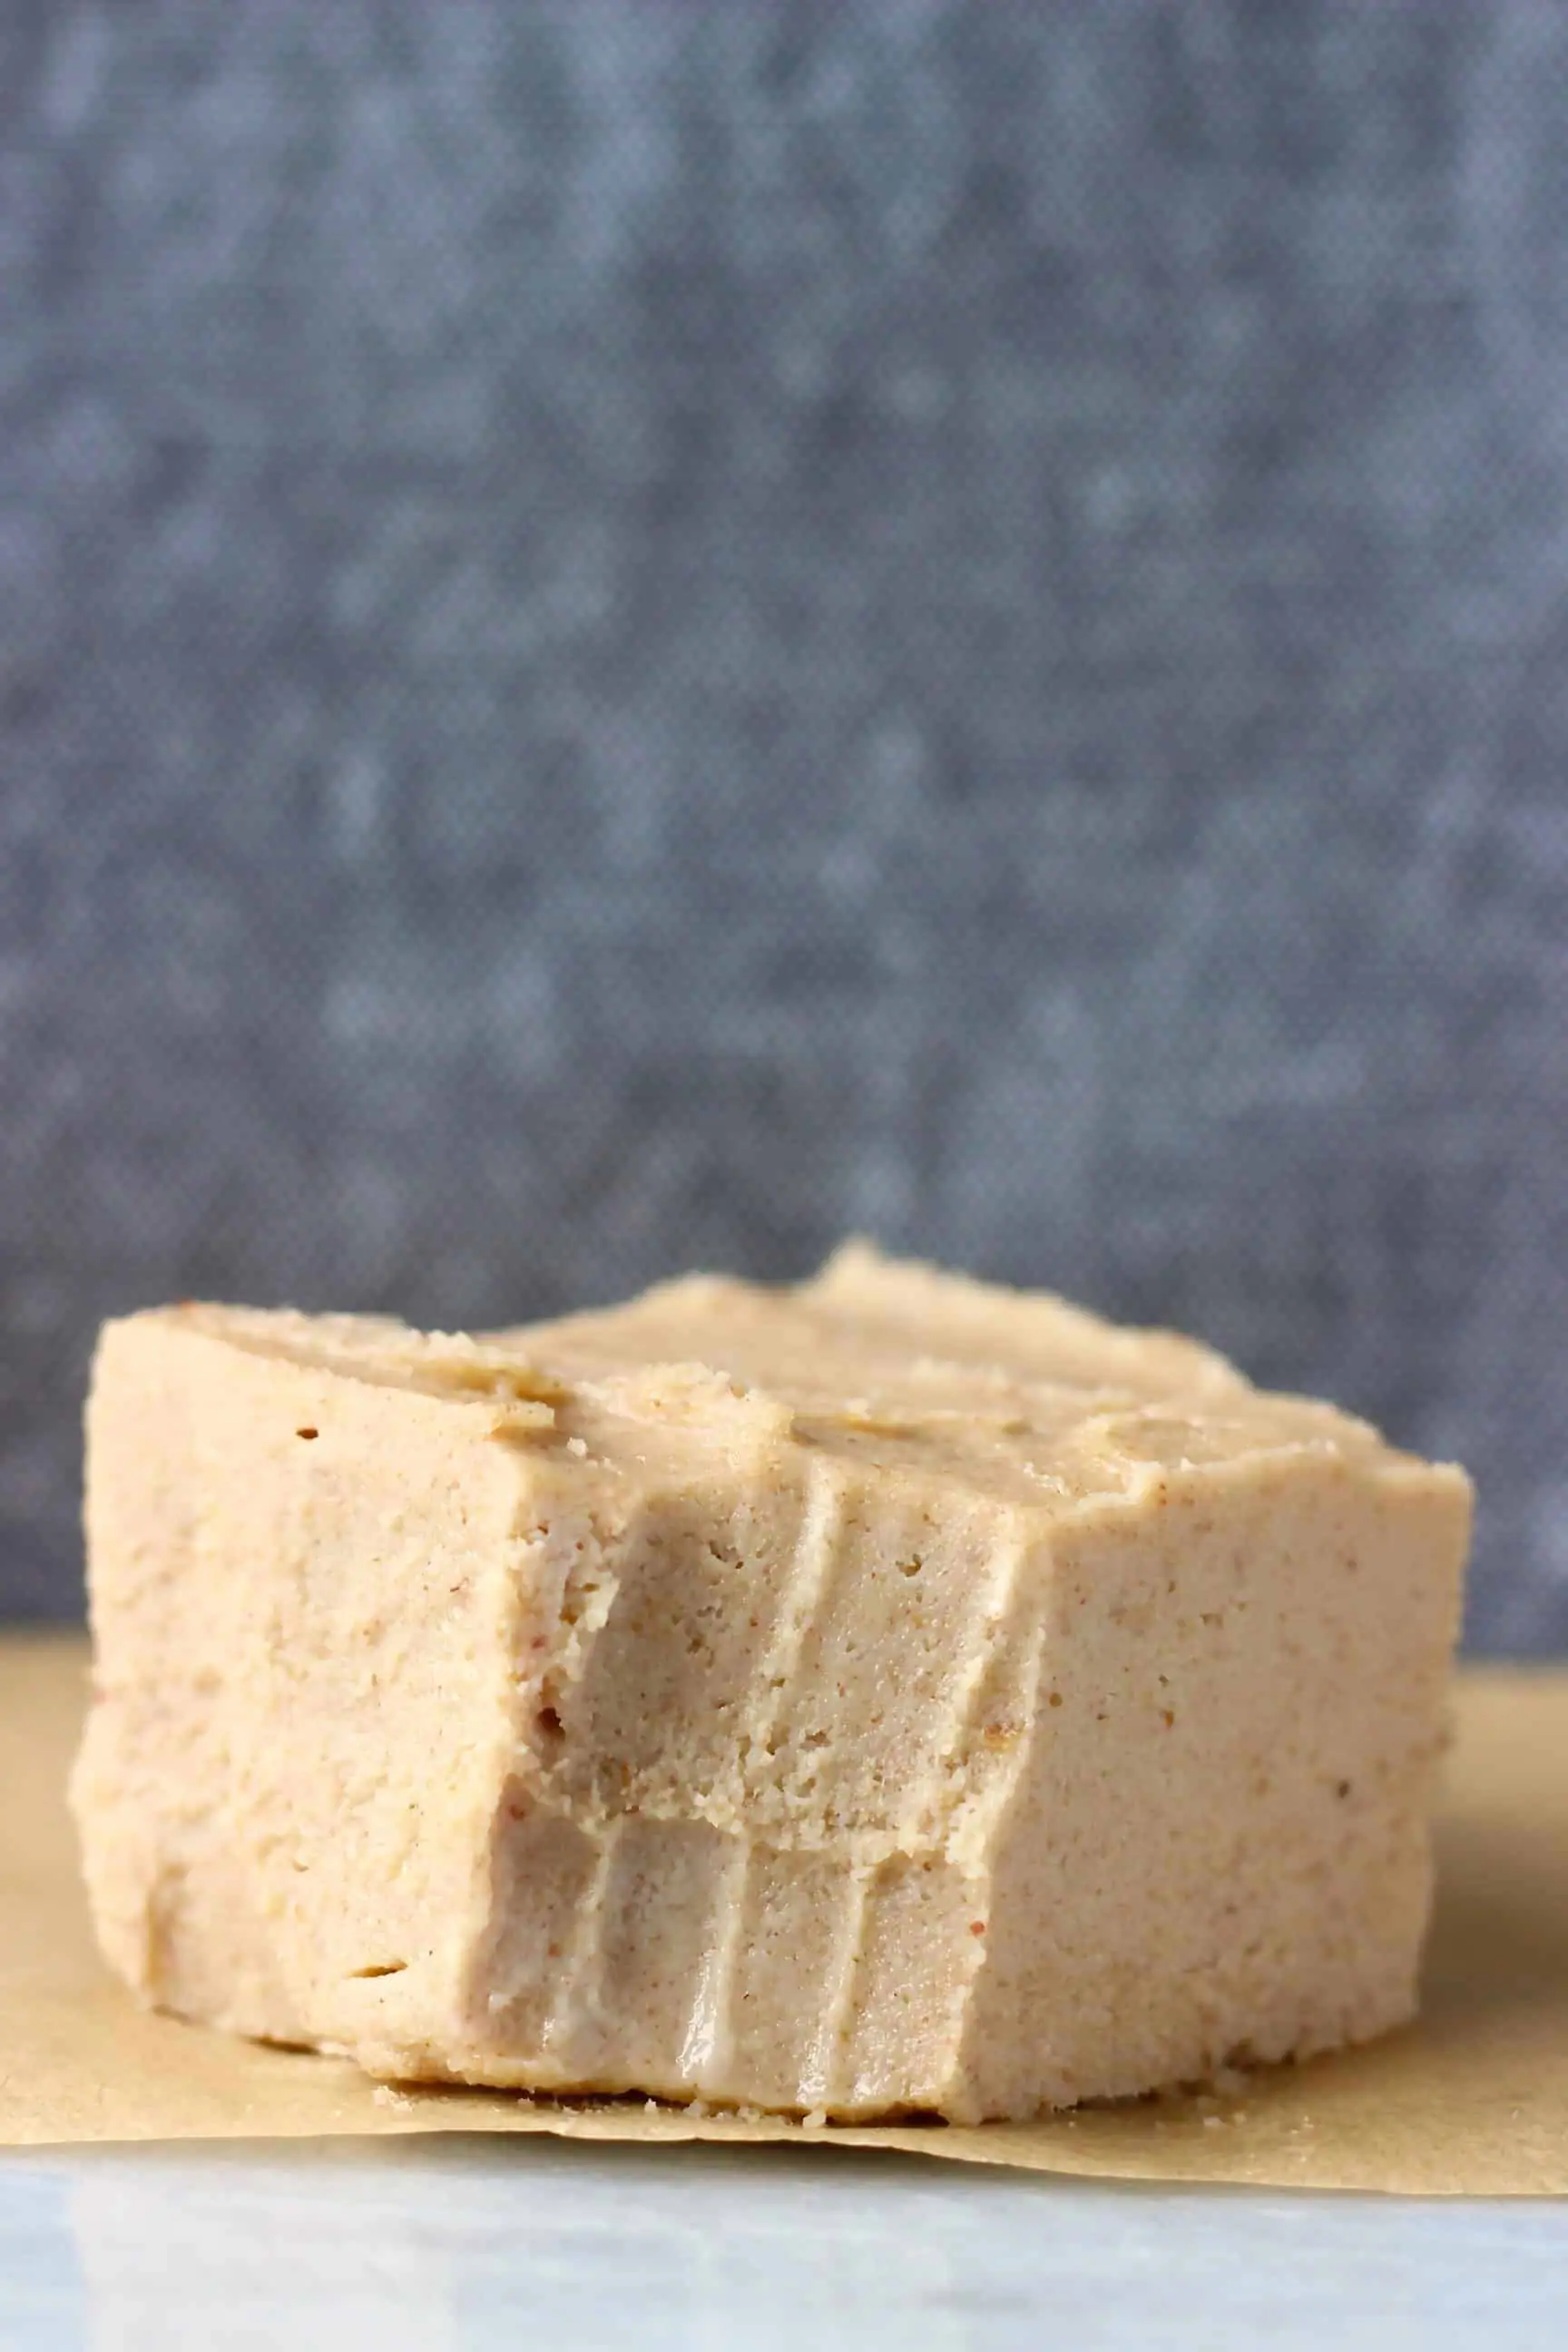 A square of caramel-coloured fudge with a bite taken out of it on a marble slab against a dark grey background